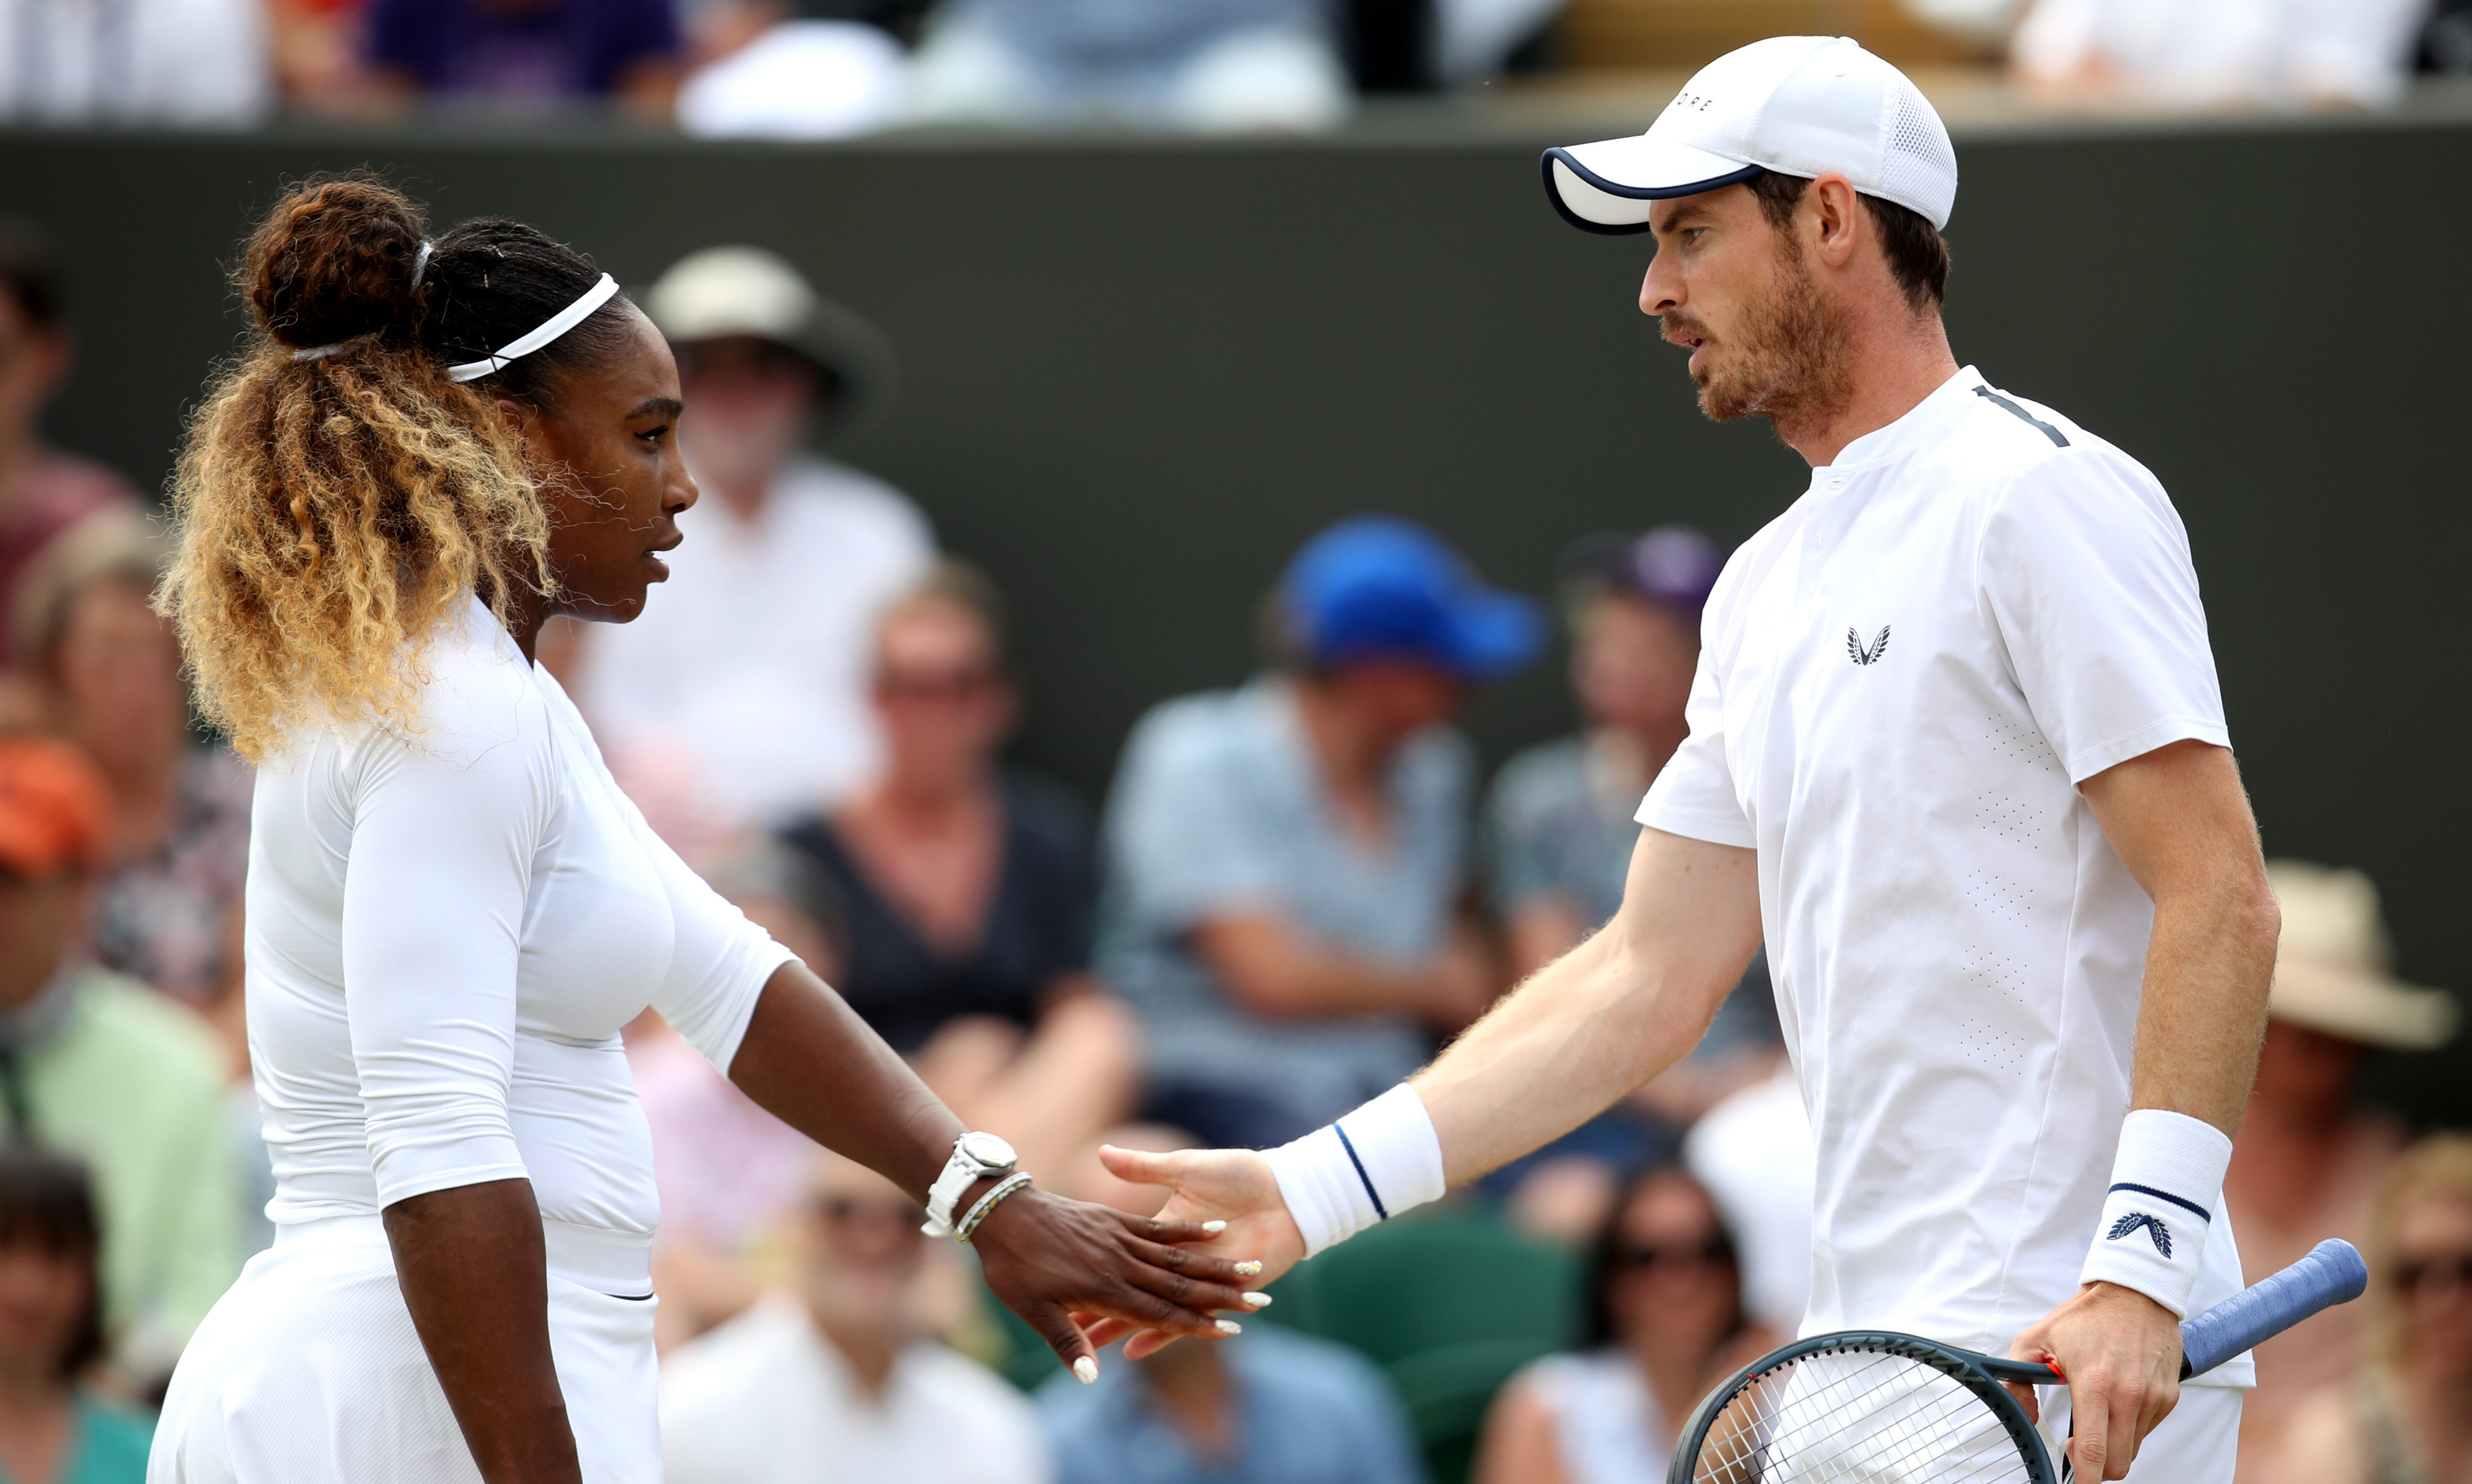 Andy Murray of Great Britain (R) and Serena Williams of the United States in their Mixed Doubles third round match against Bruno Soares of Brazil and Nicole Melichar of the United States.